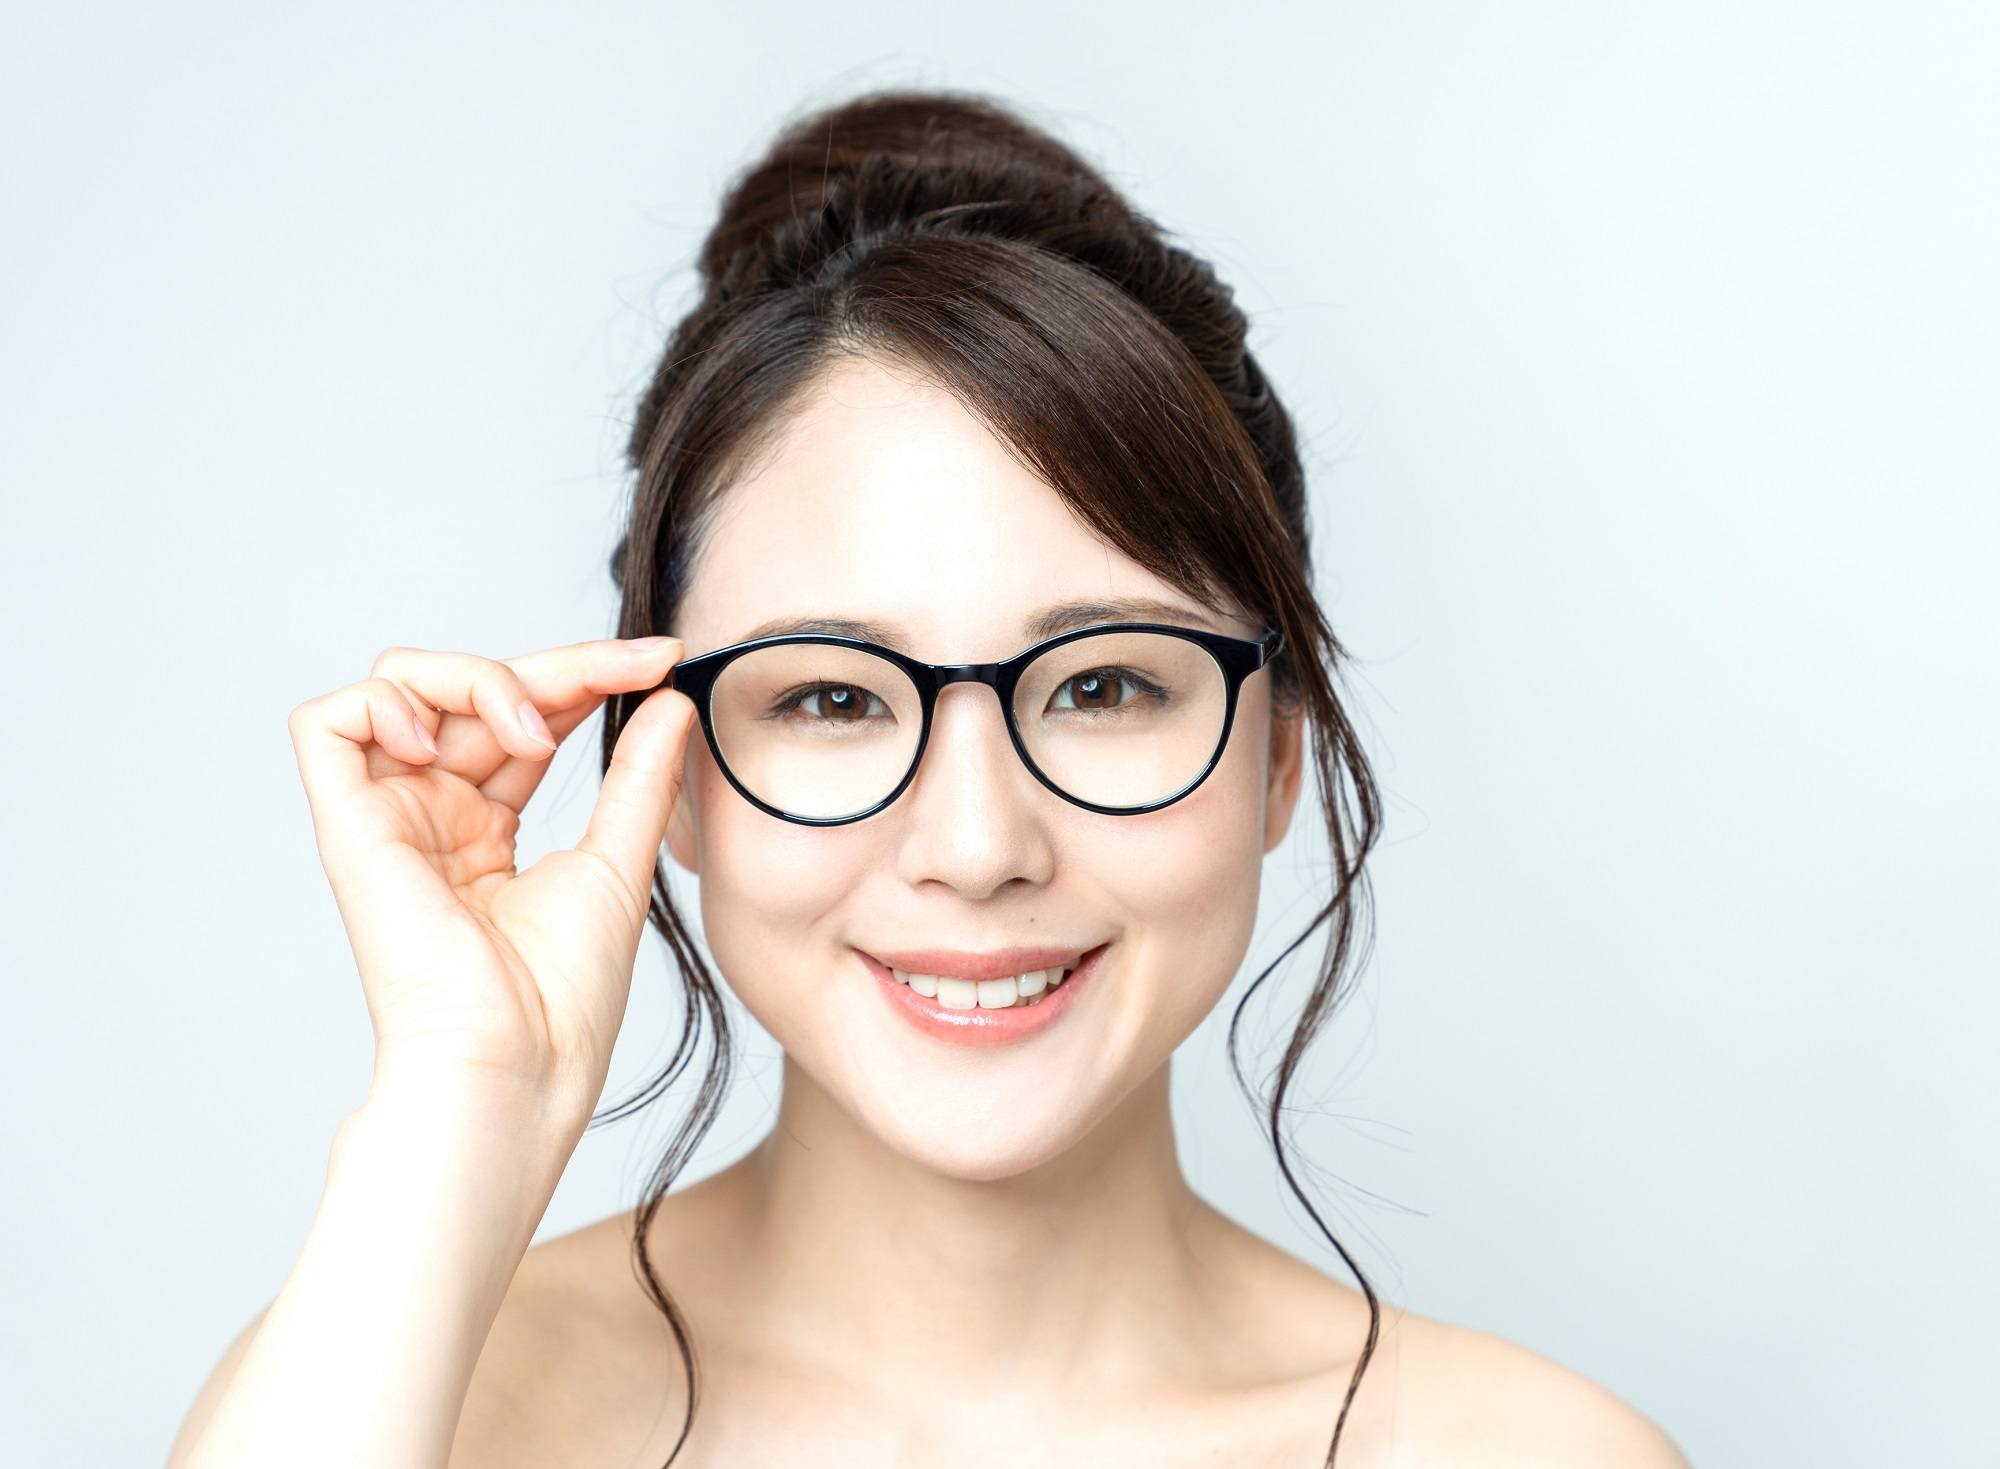 bangs with glasses updo with bangs shutterstock